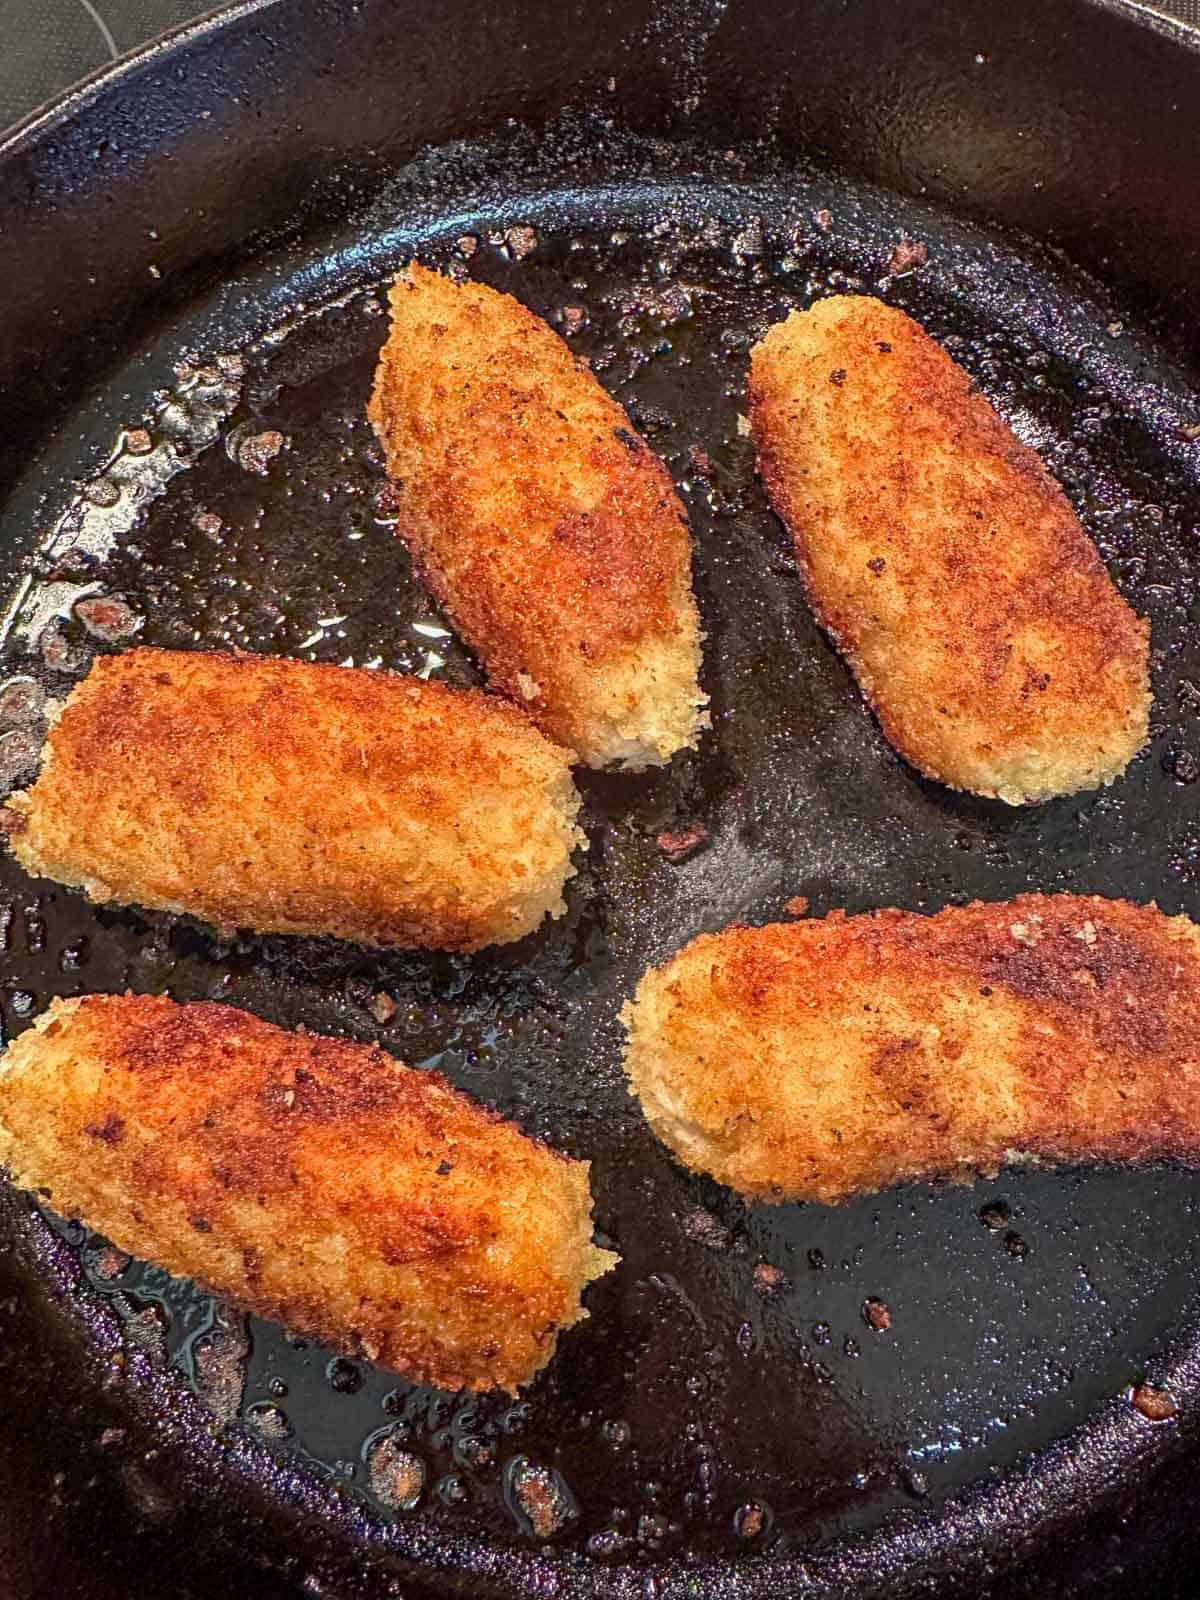 Golden brown ground chicken cutlets cooked in a cast iron skillet.